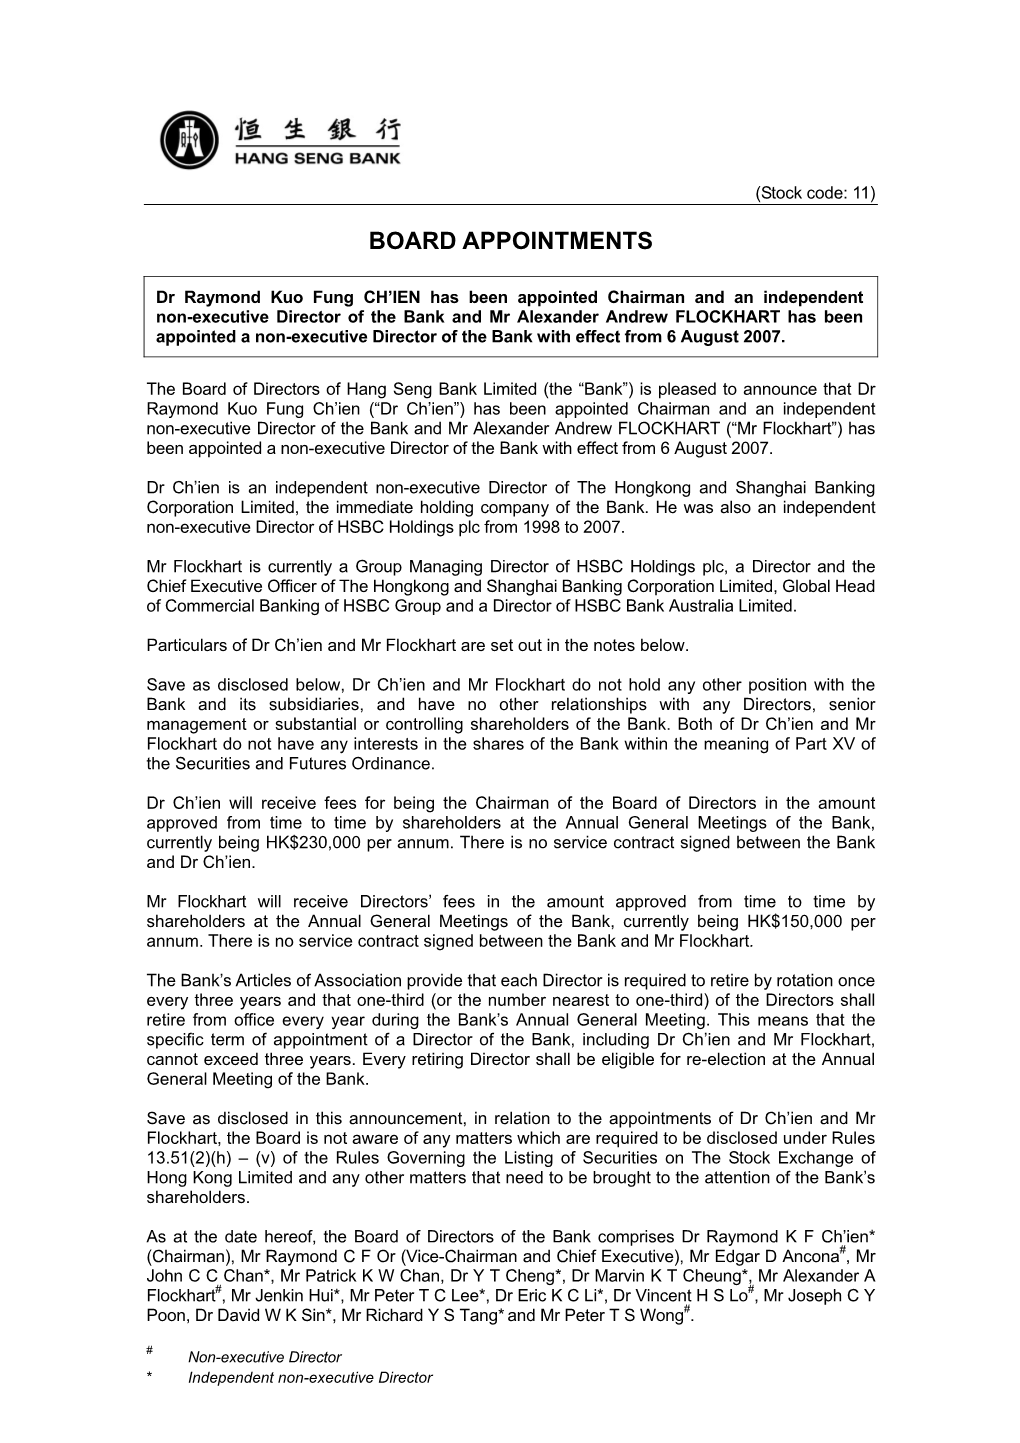 Board Appointments (6 August 2007)